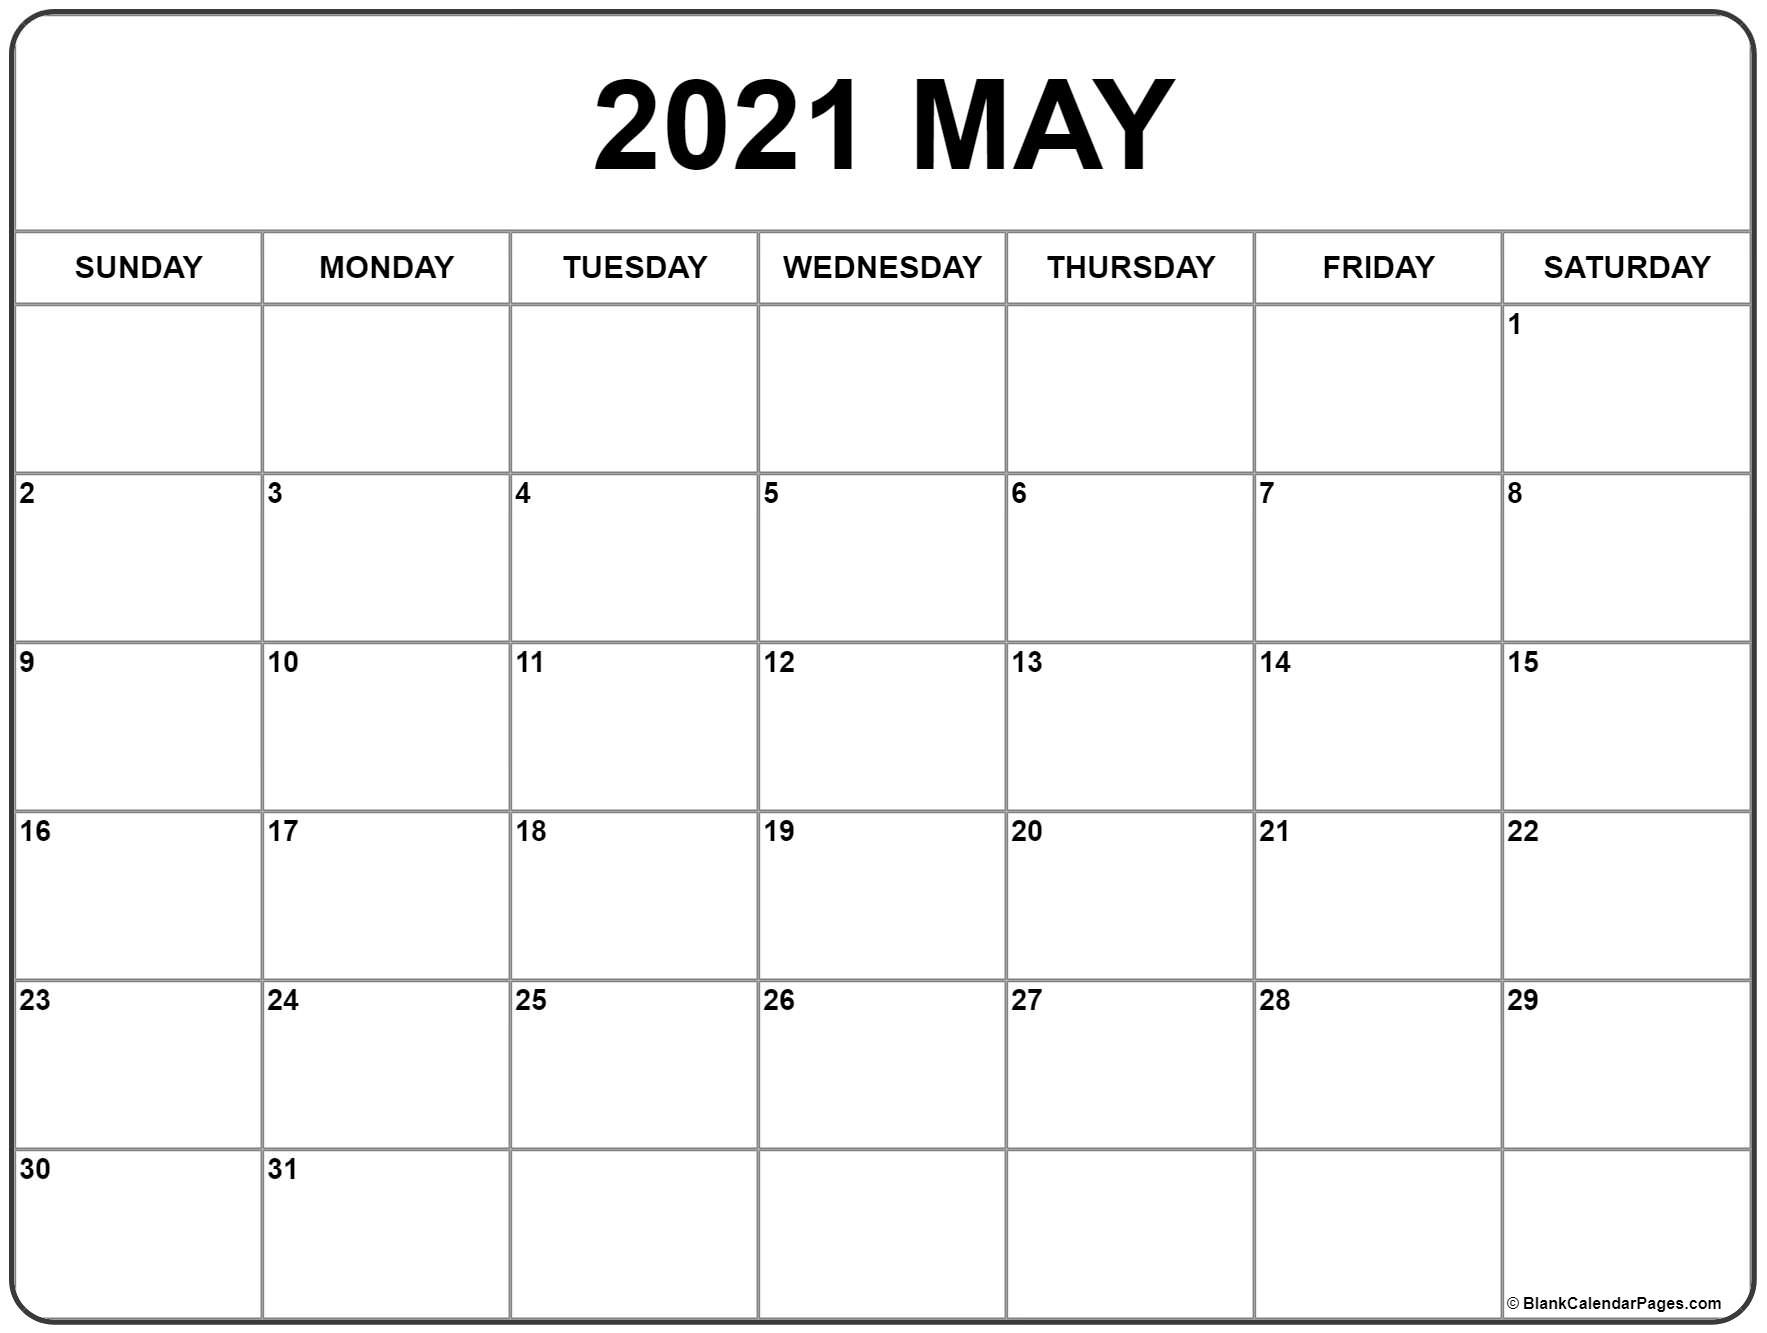 May 2021 Calendar | Free Printable Monthly Calendars-2021 2 Page Per Month May Calendar Picture